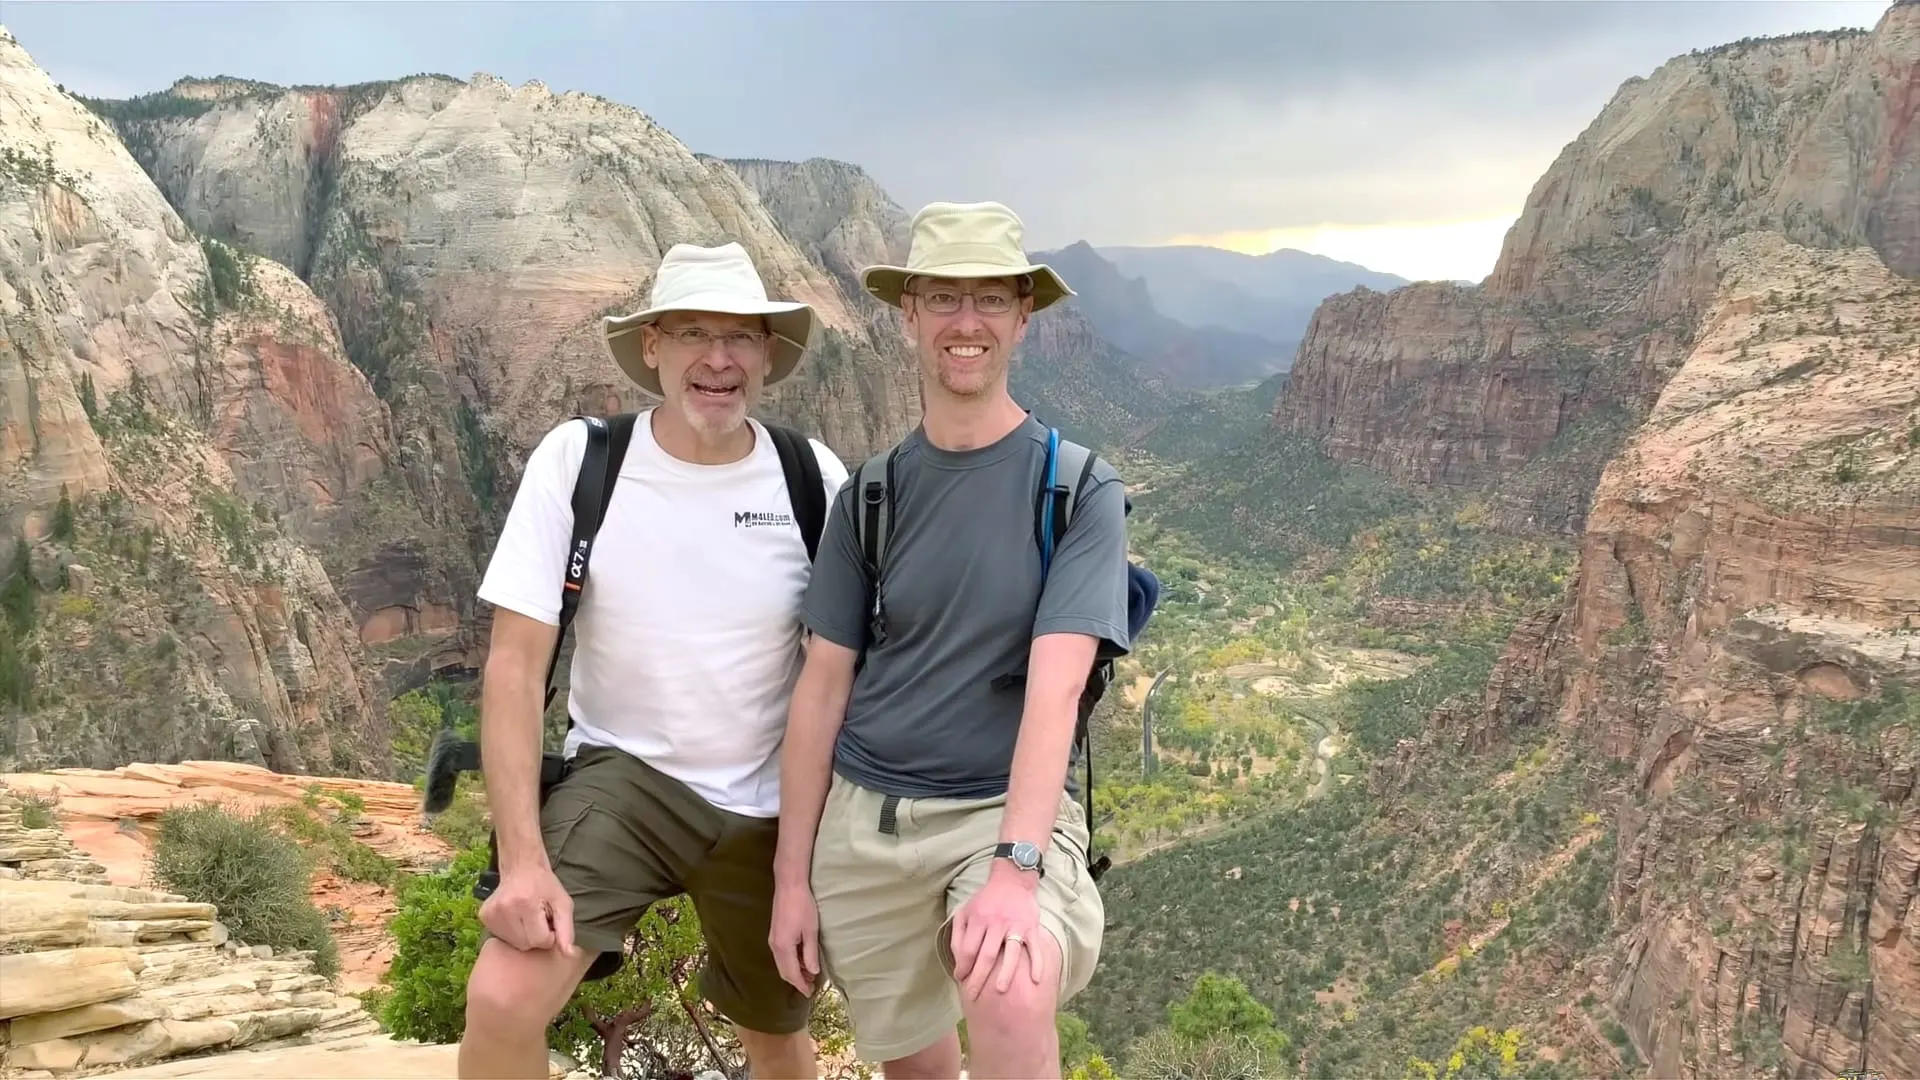 John and Peter at Zion National Park - can Campnab get us a reservation here?